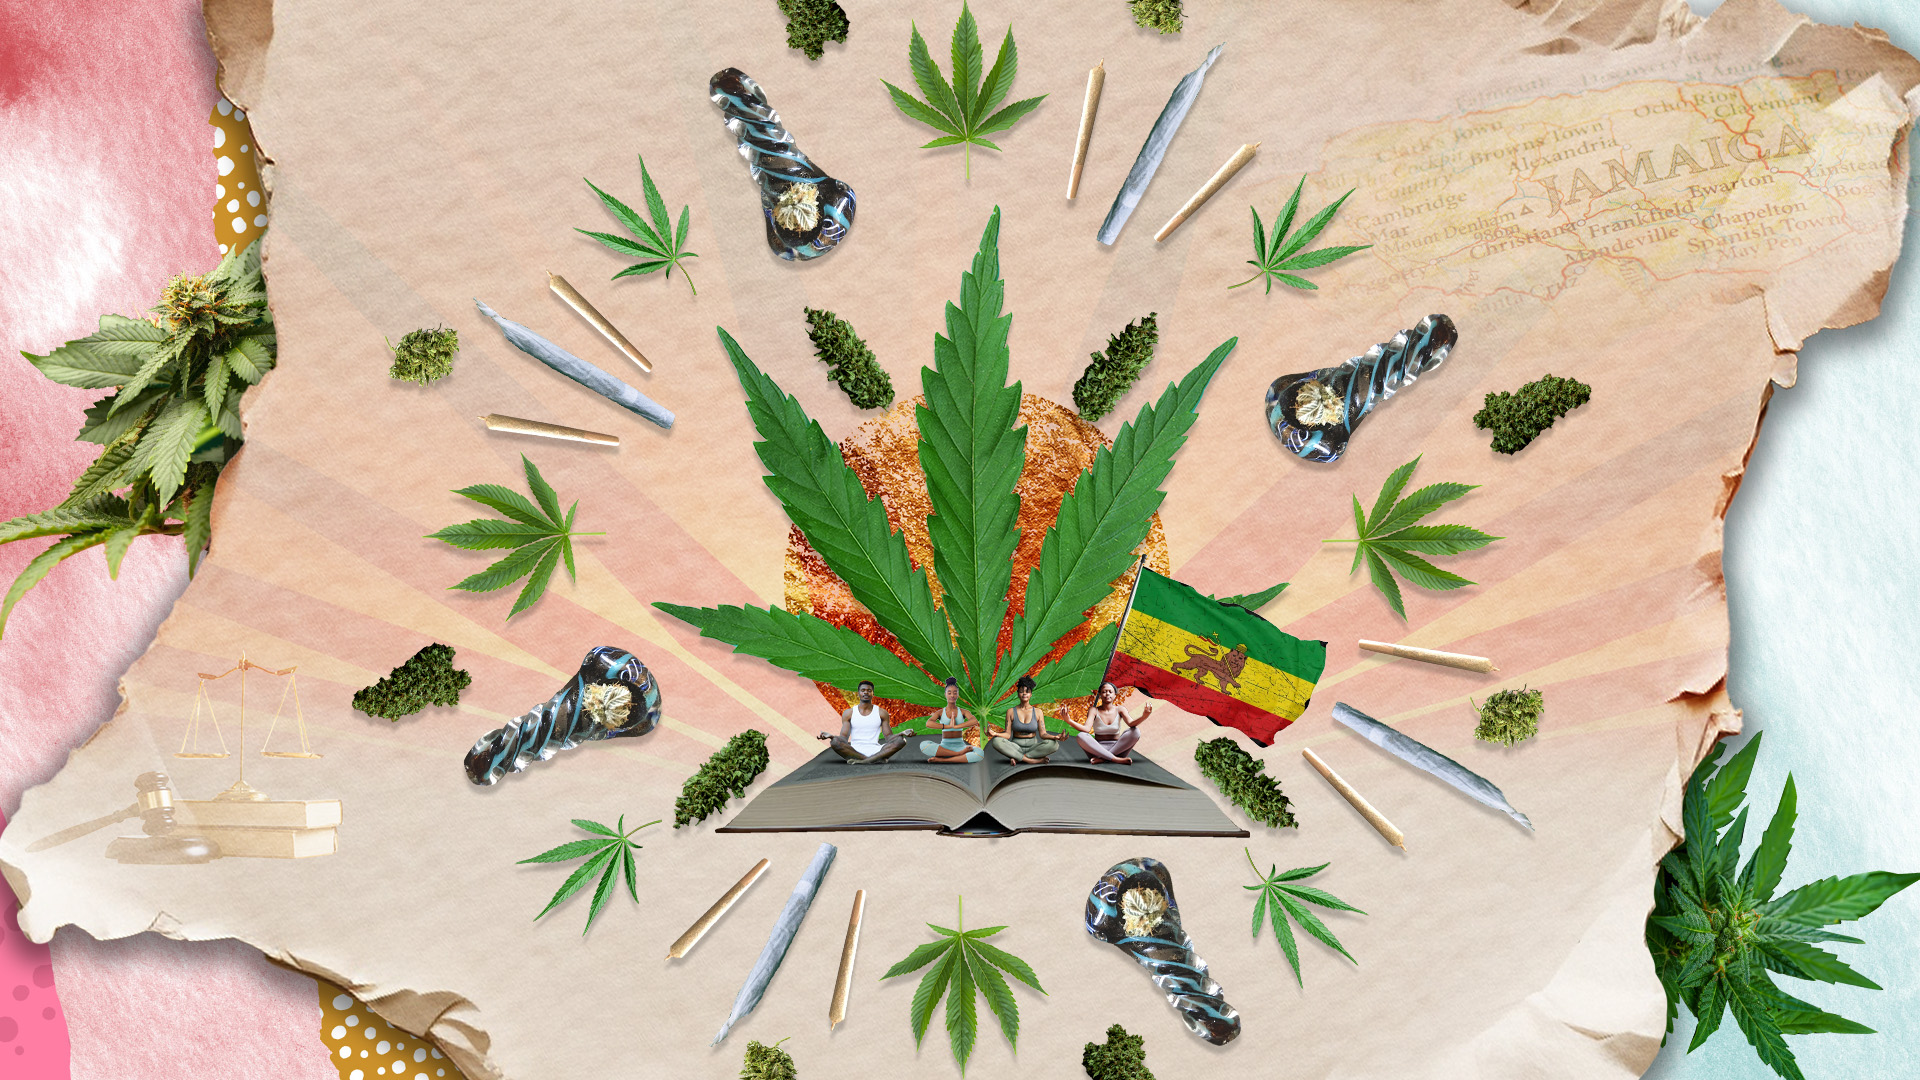 Connecting with the “Holy Herb”: Cannabis in Rastafari Culture